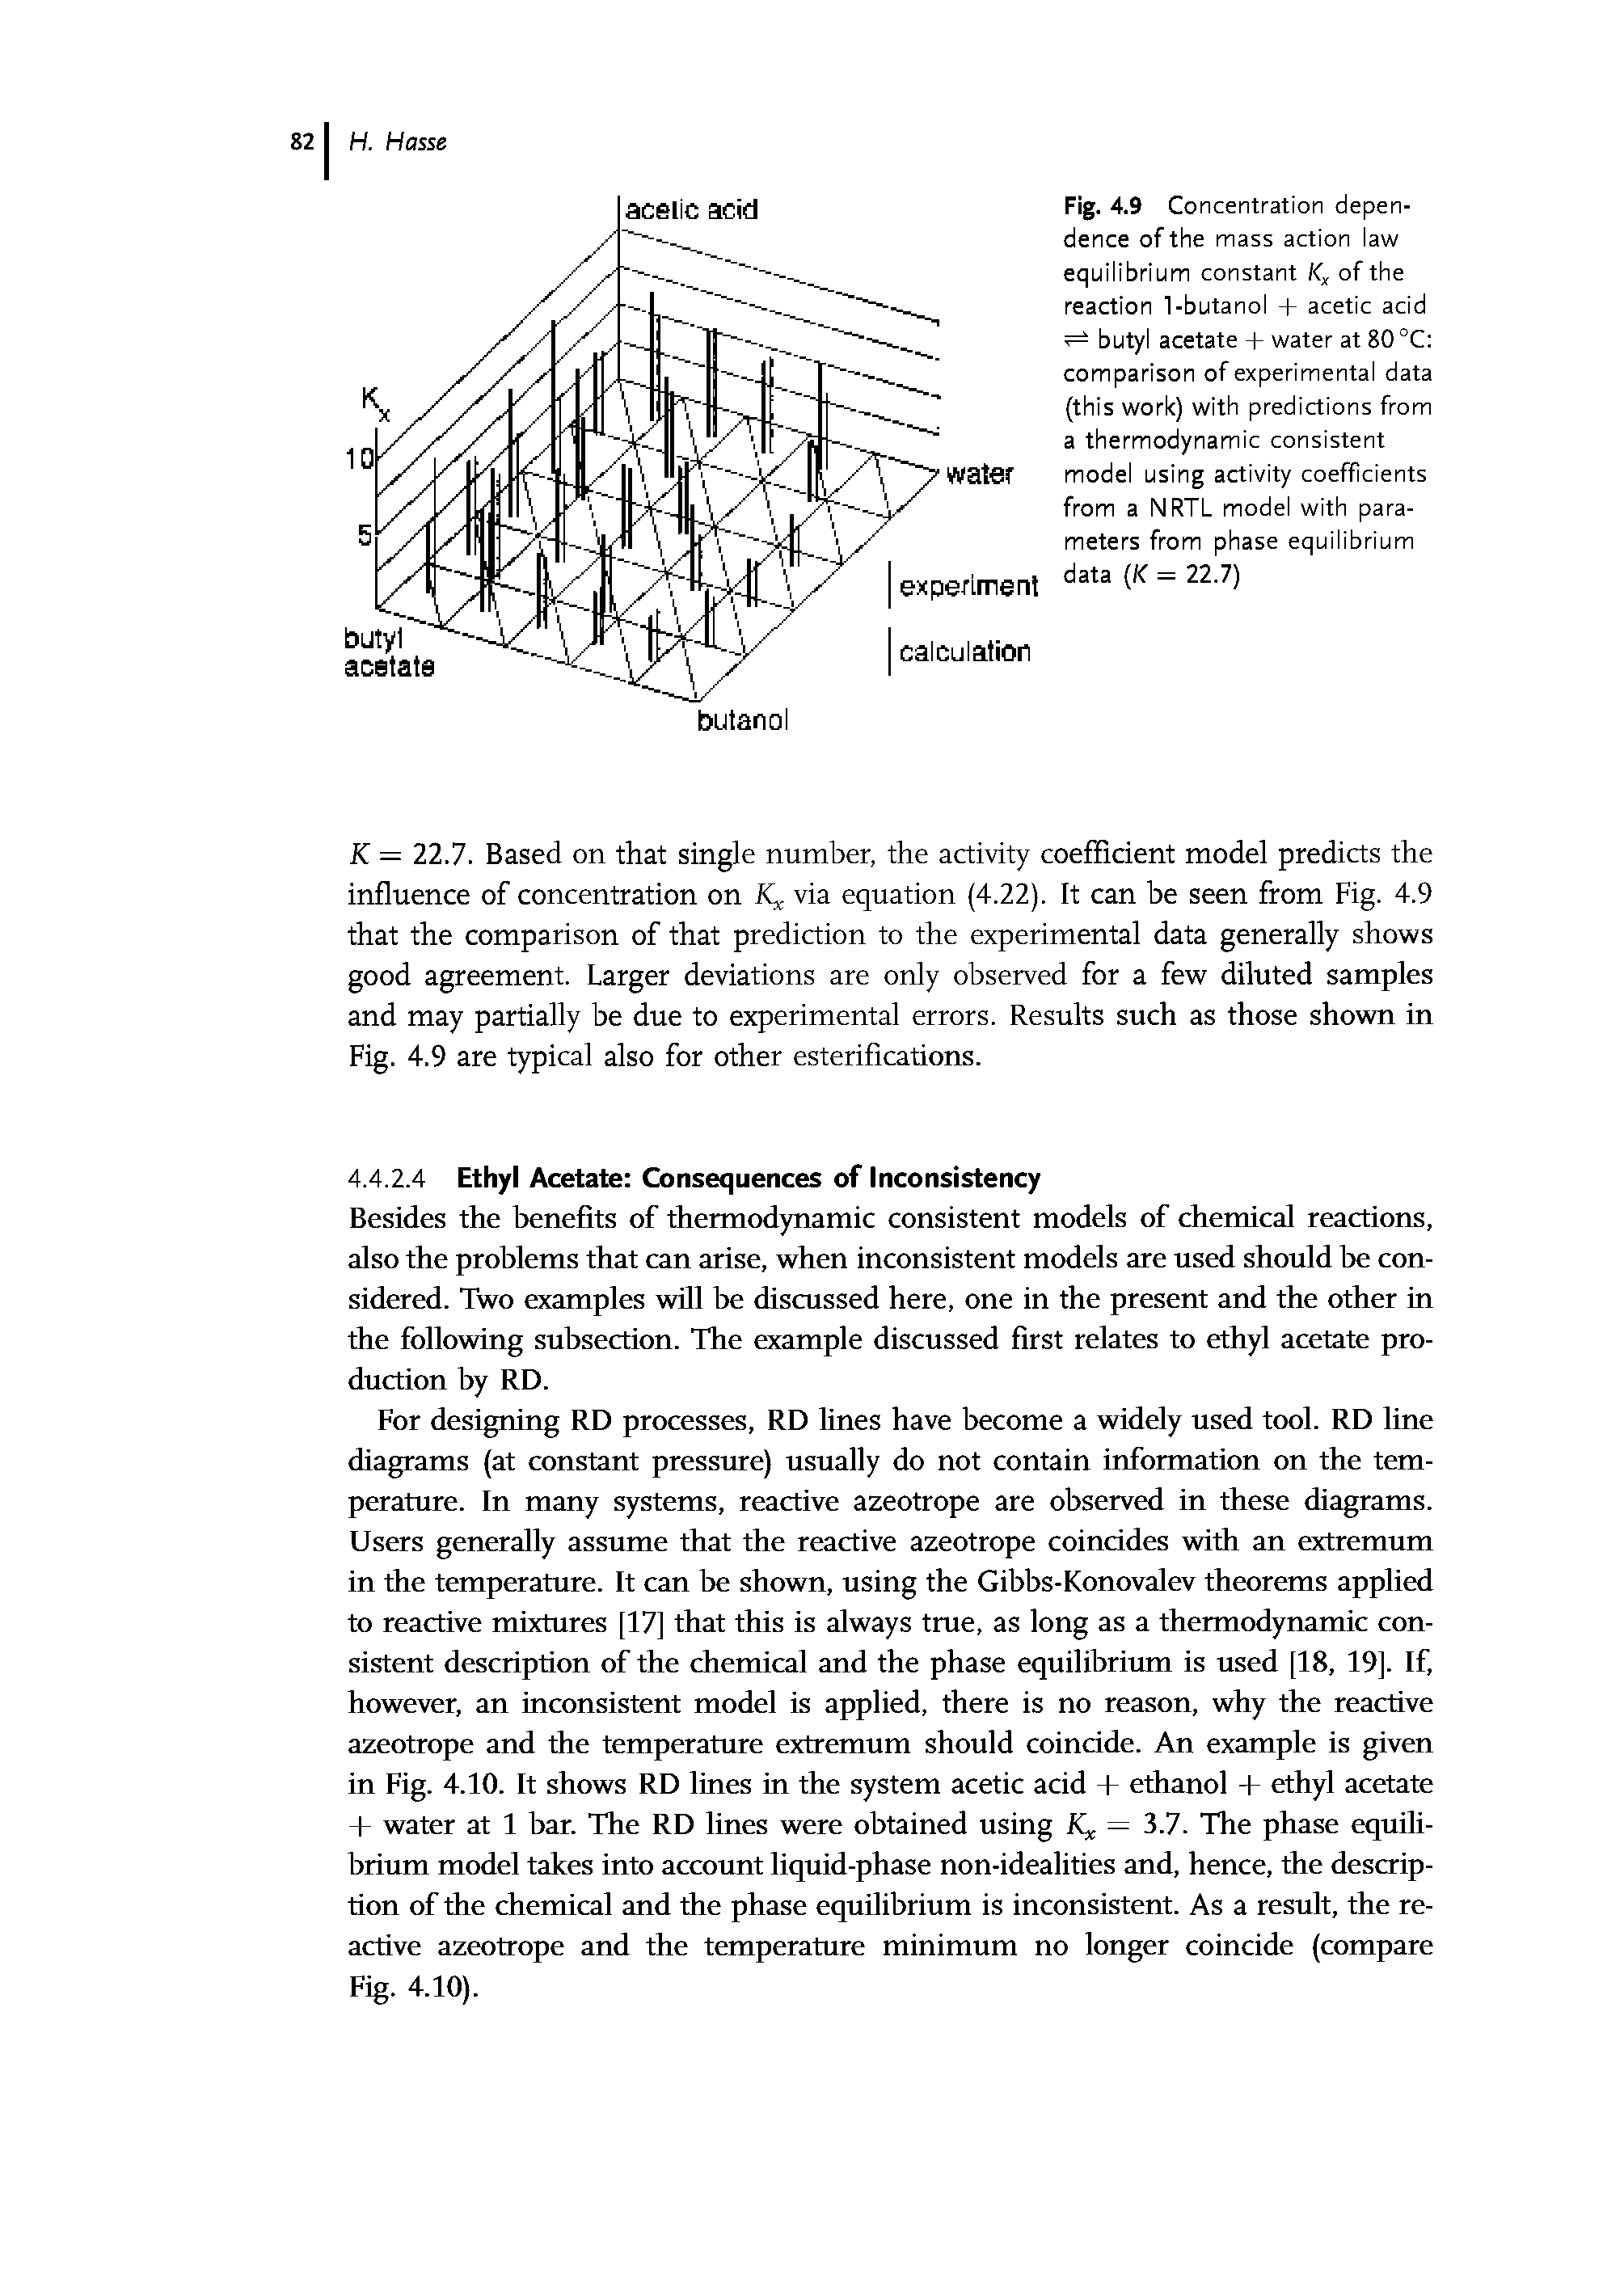 Fig. 4.9 Concentration dependence of the mass action law equilibrium constant /C, of the reaction 1-butanol + acetic acid butyl acetate + water at 80 °C comparison of experimental data (this work) with predictions from a thermodynamic consistent model using activity coefficients from a NRTL model with parameters from phase equilibrium data K = 22.7)...